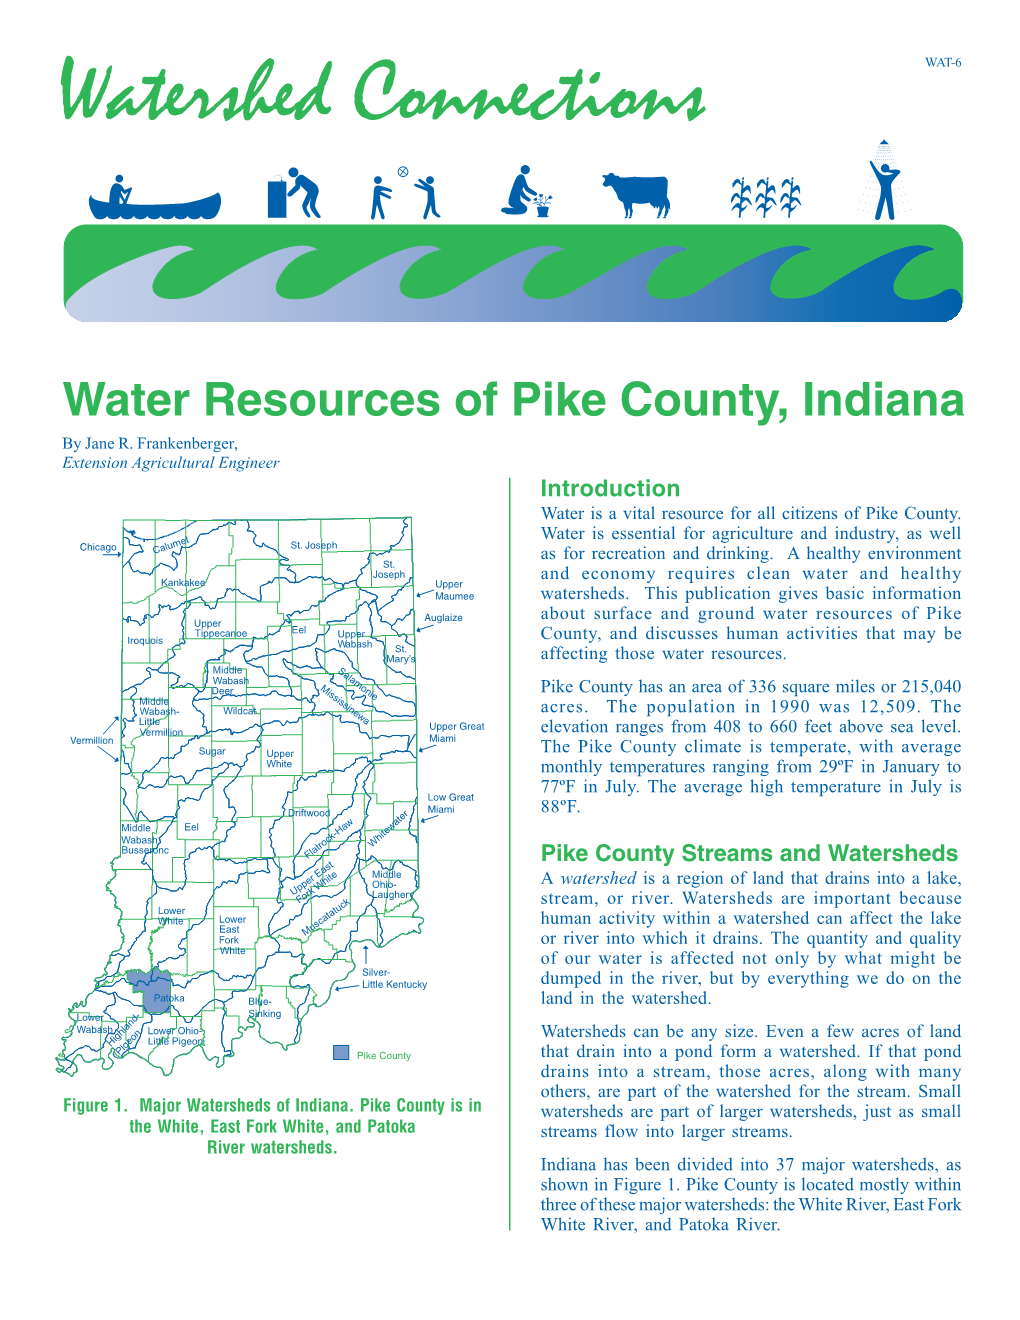 Water Resources of Pike County, Indiana by Jane R